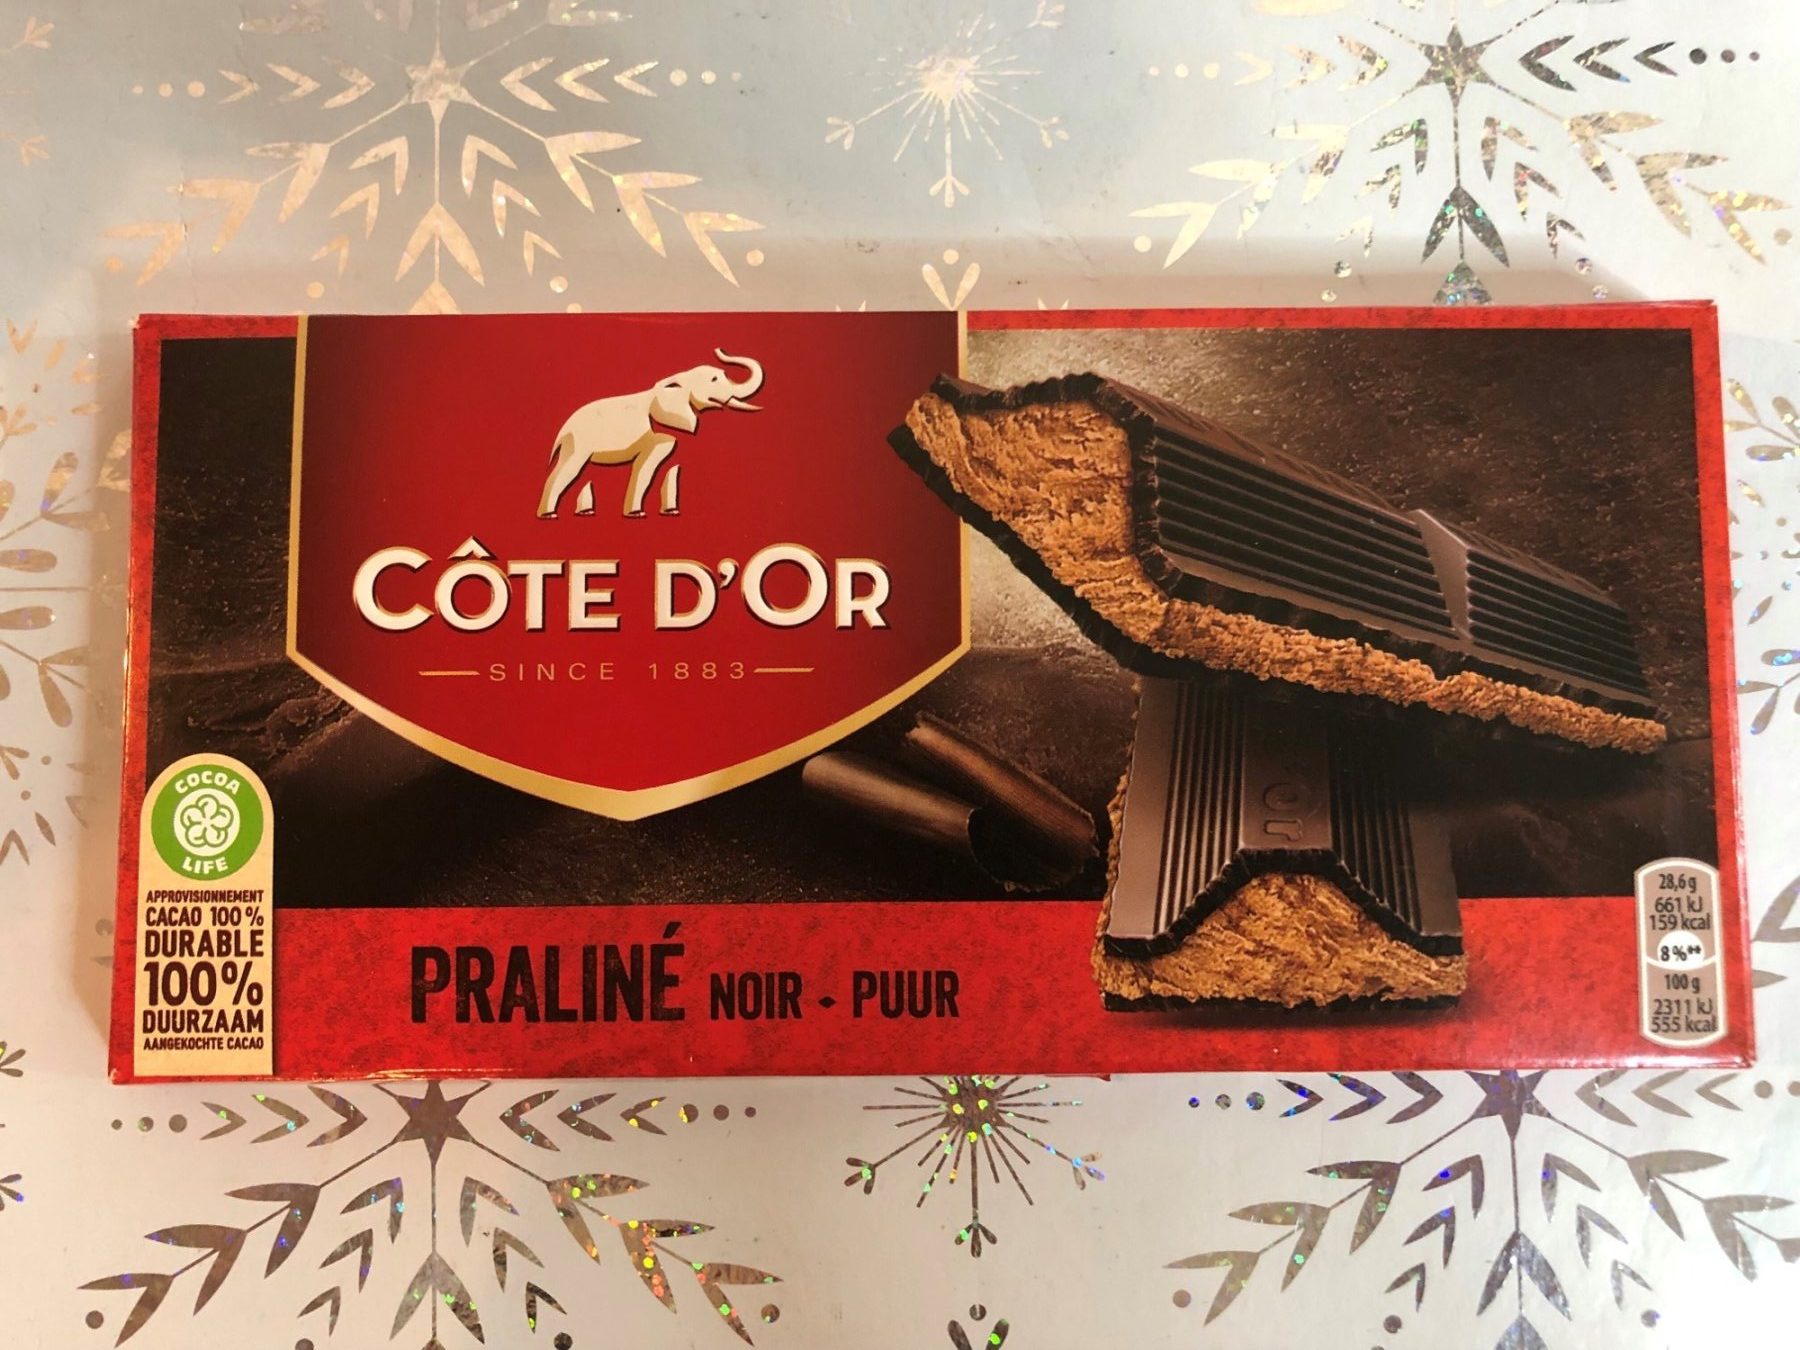 Cote D'Or dark chocolate with praline filling